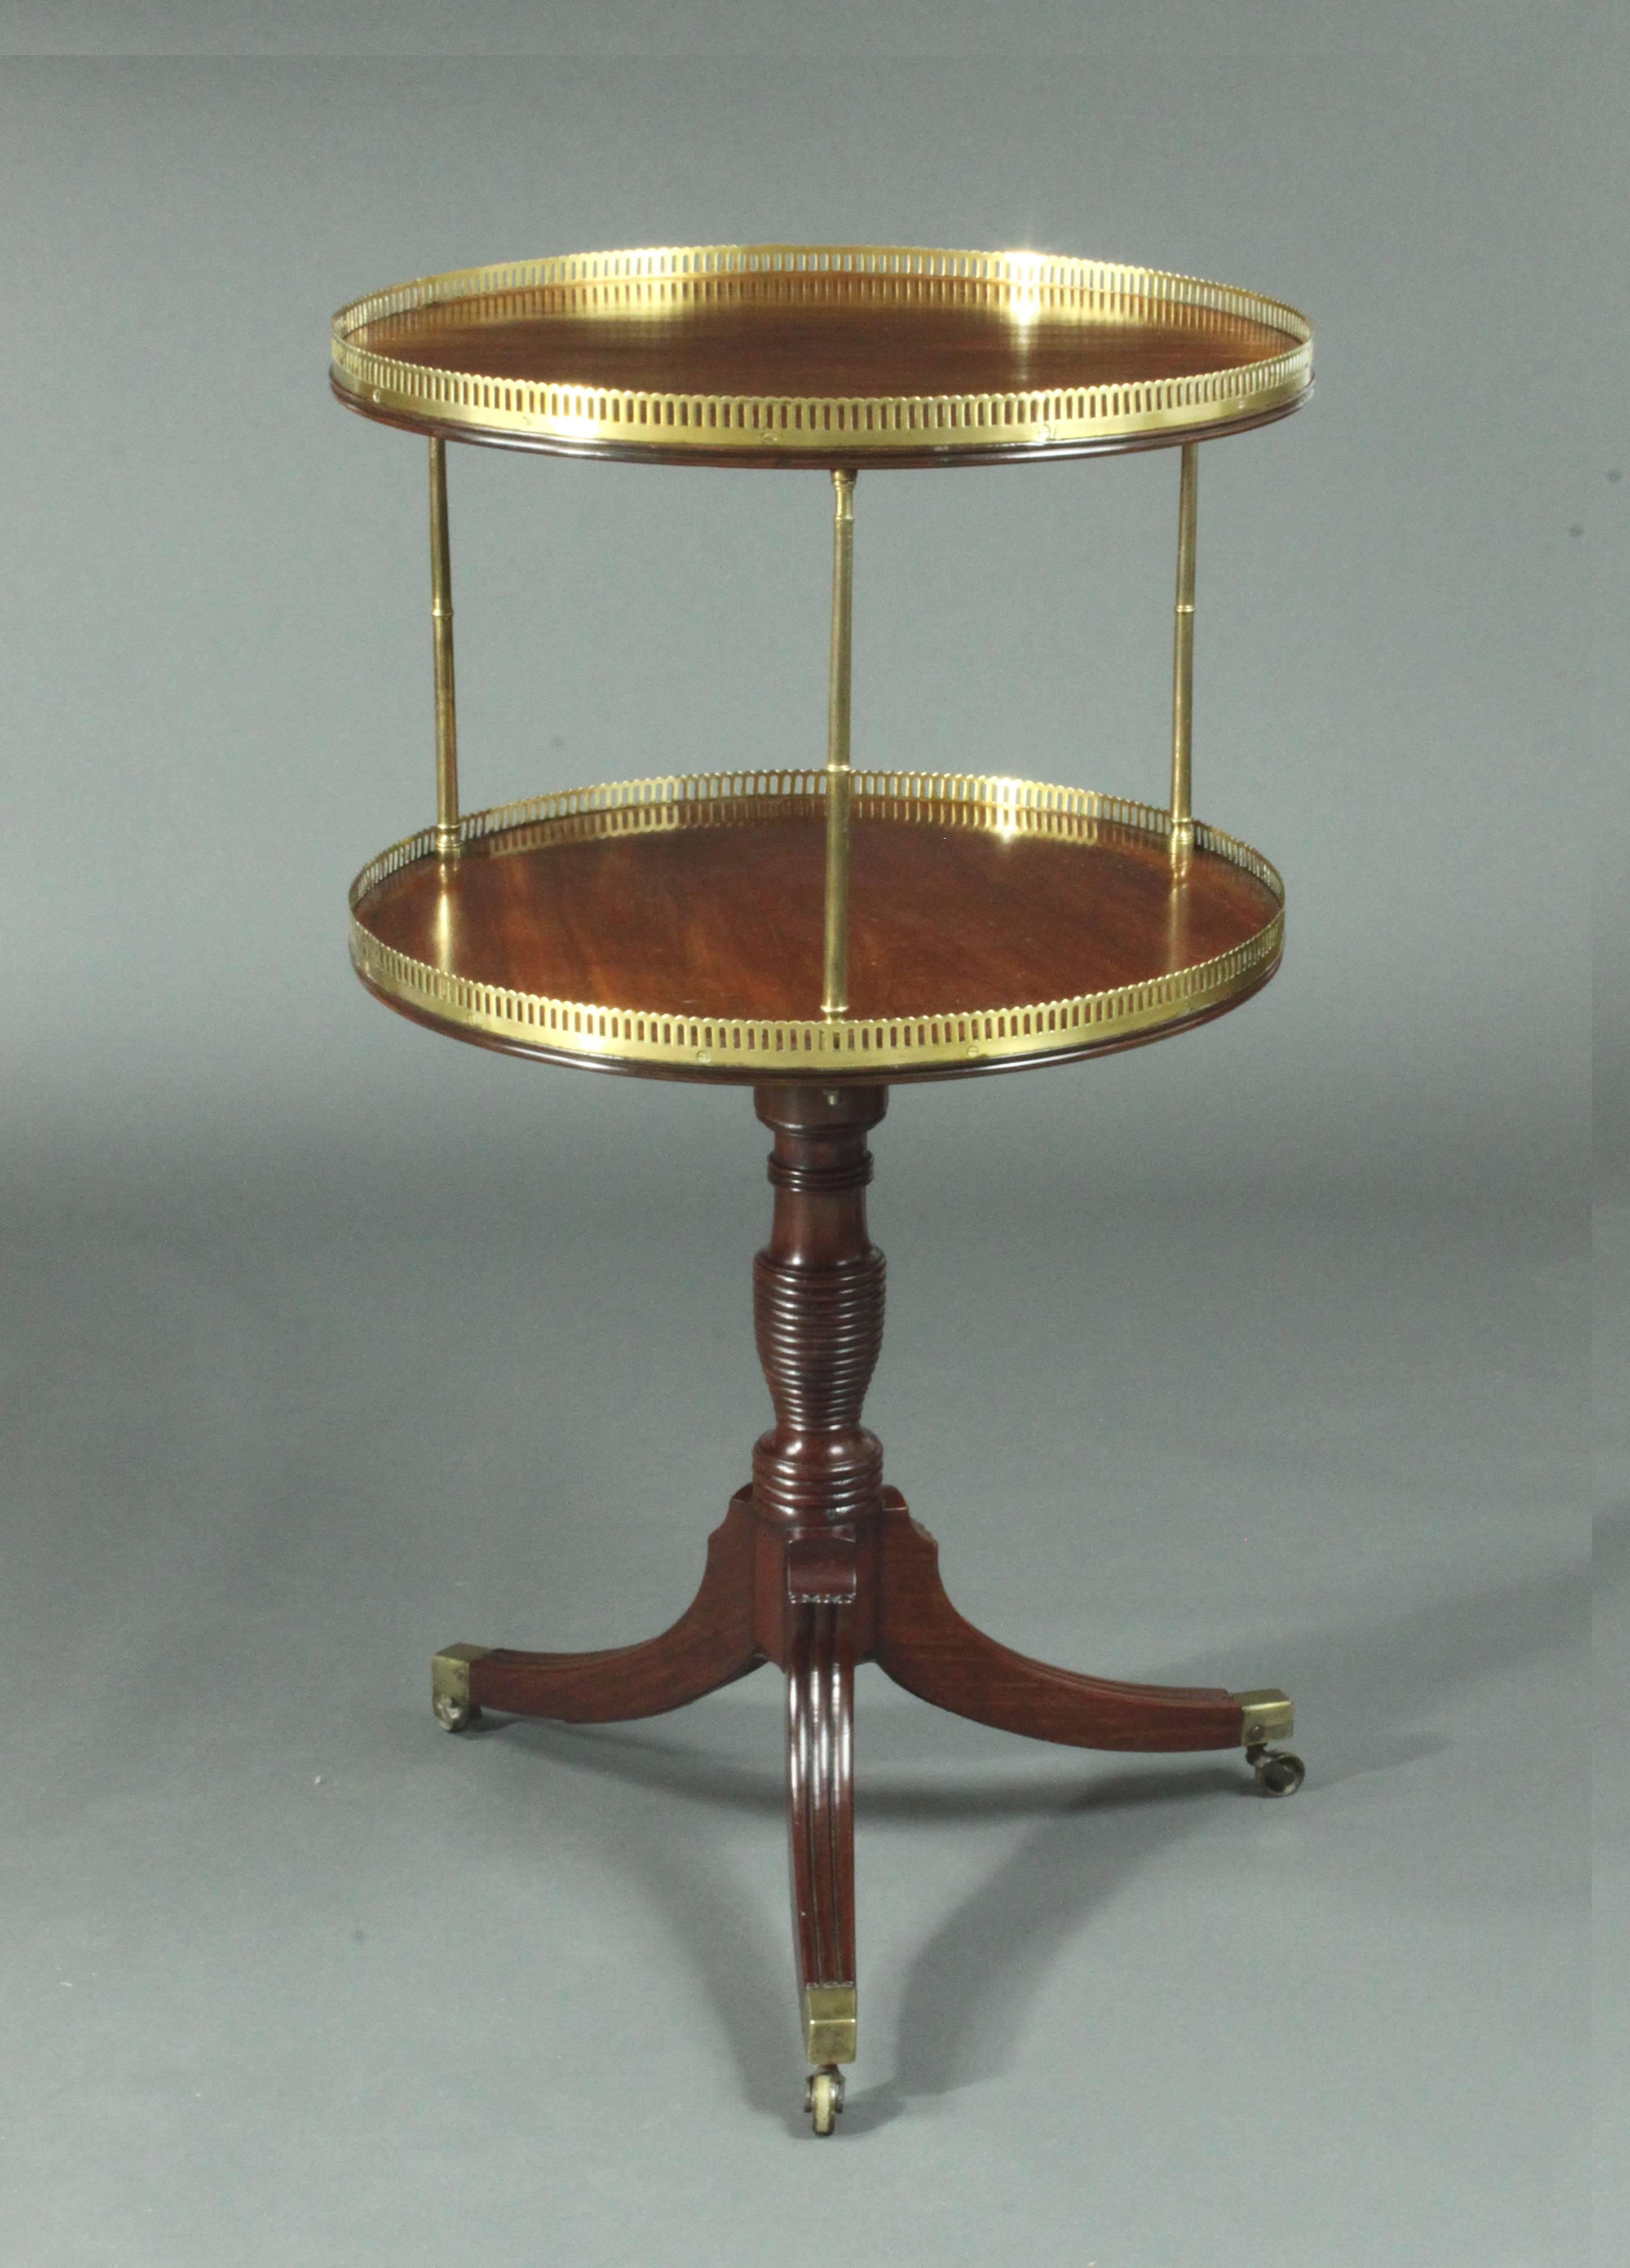 A fine pair of two-tier Regency mahogany dumb waiters with brass pillars and galleries.
   
    